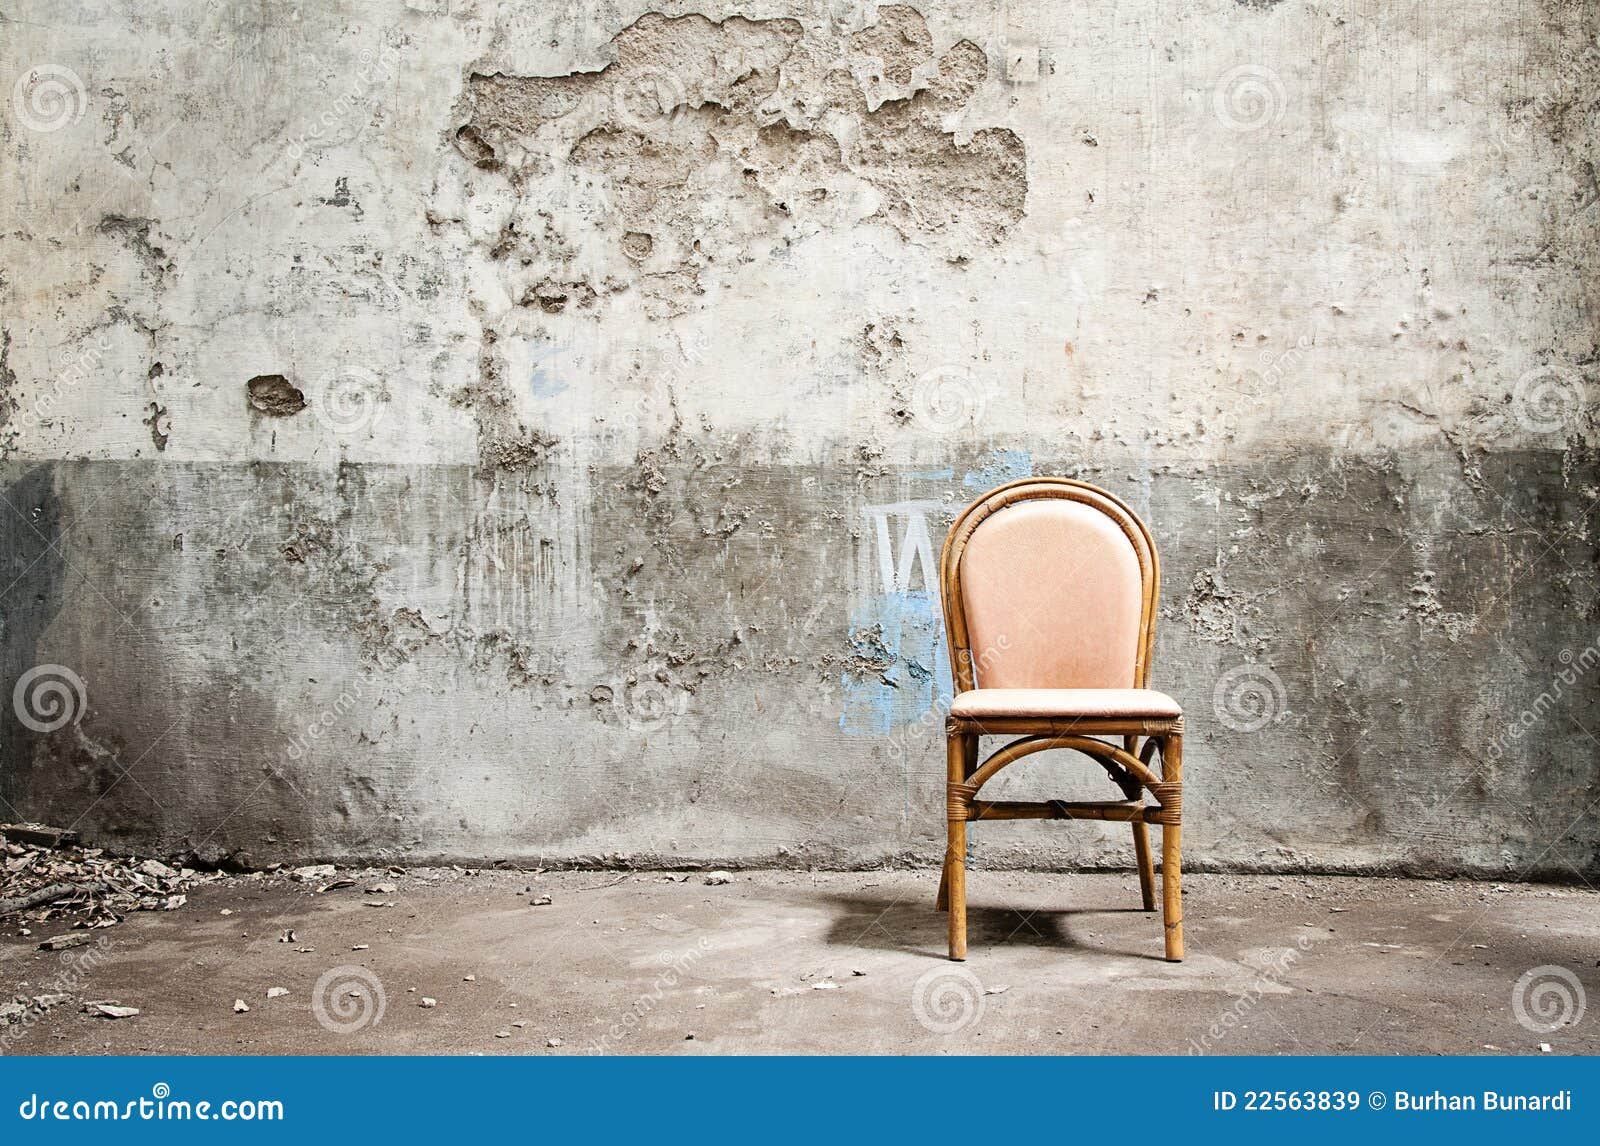 Empty Chair and Grungy Wall Stock Image - Image of dark, rust: 22563839